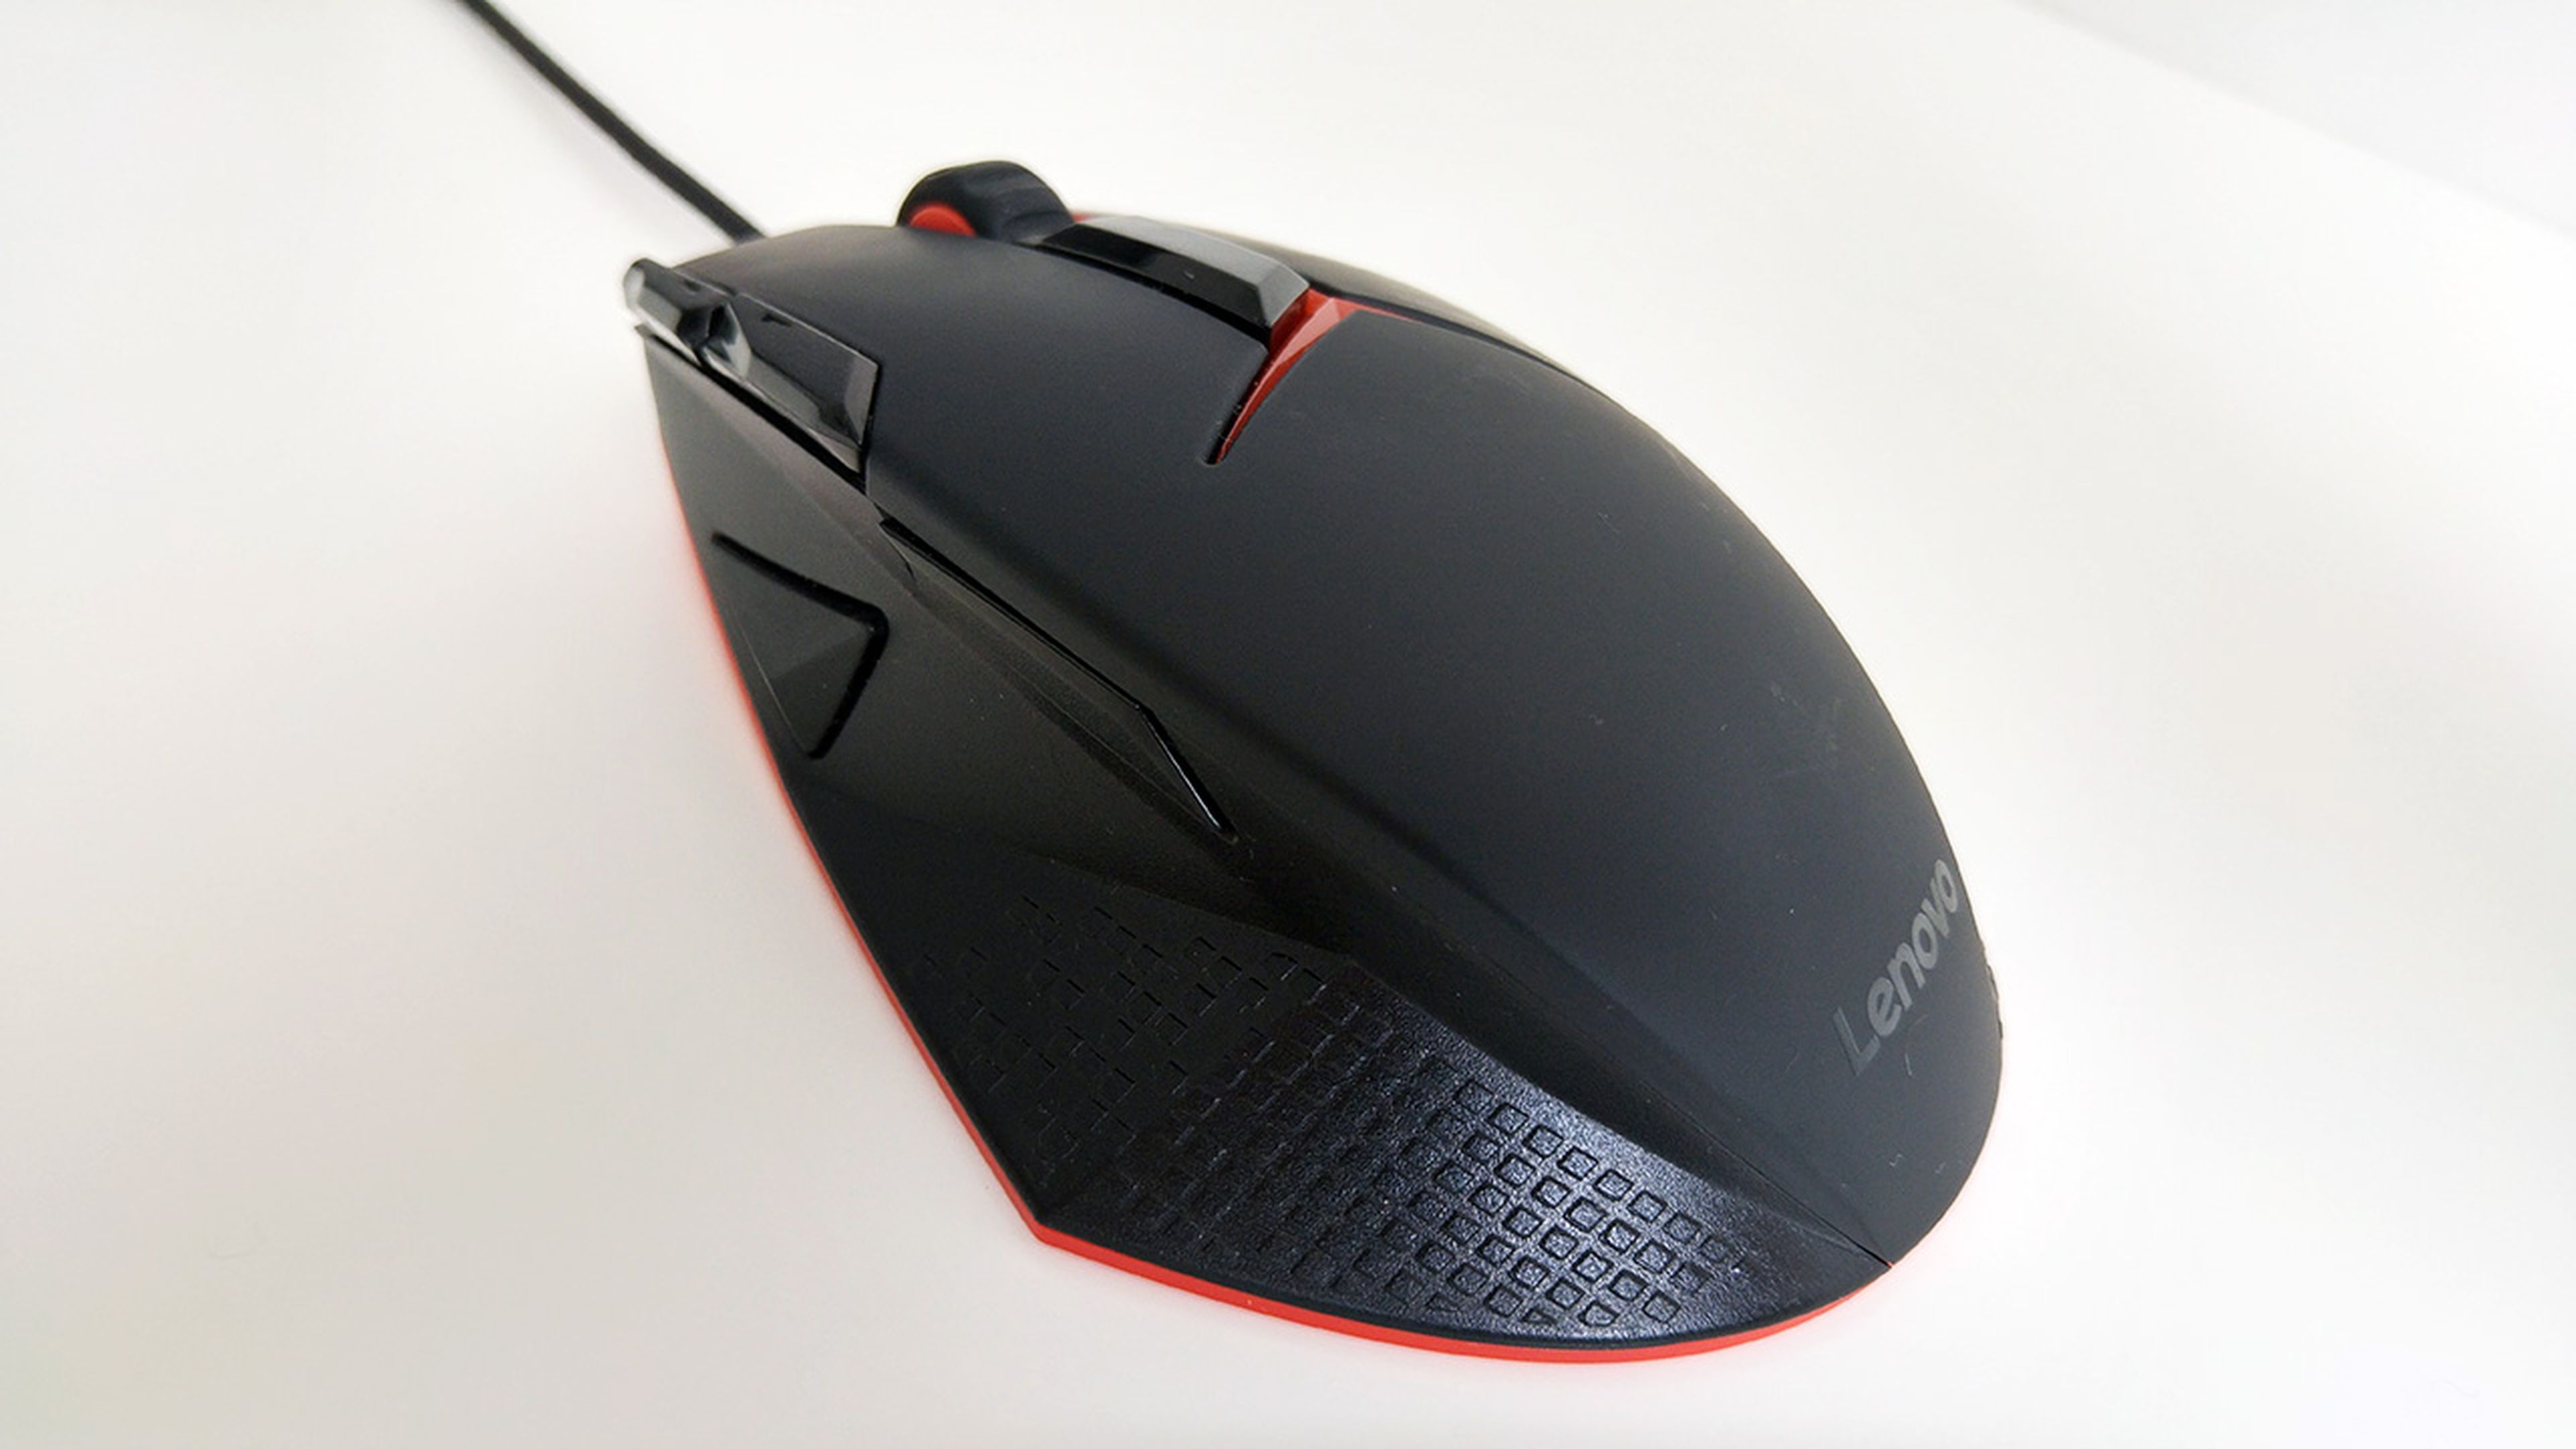 Botons del Lenovo gaming mouse